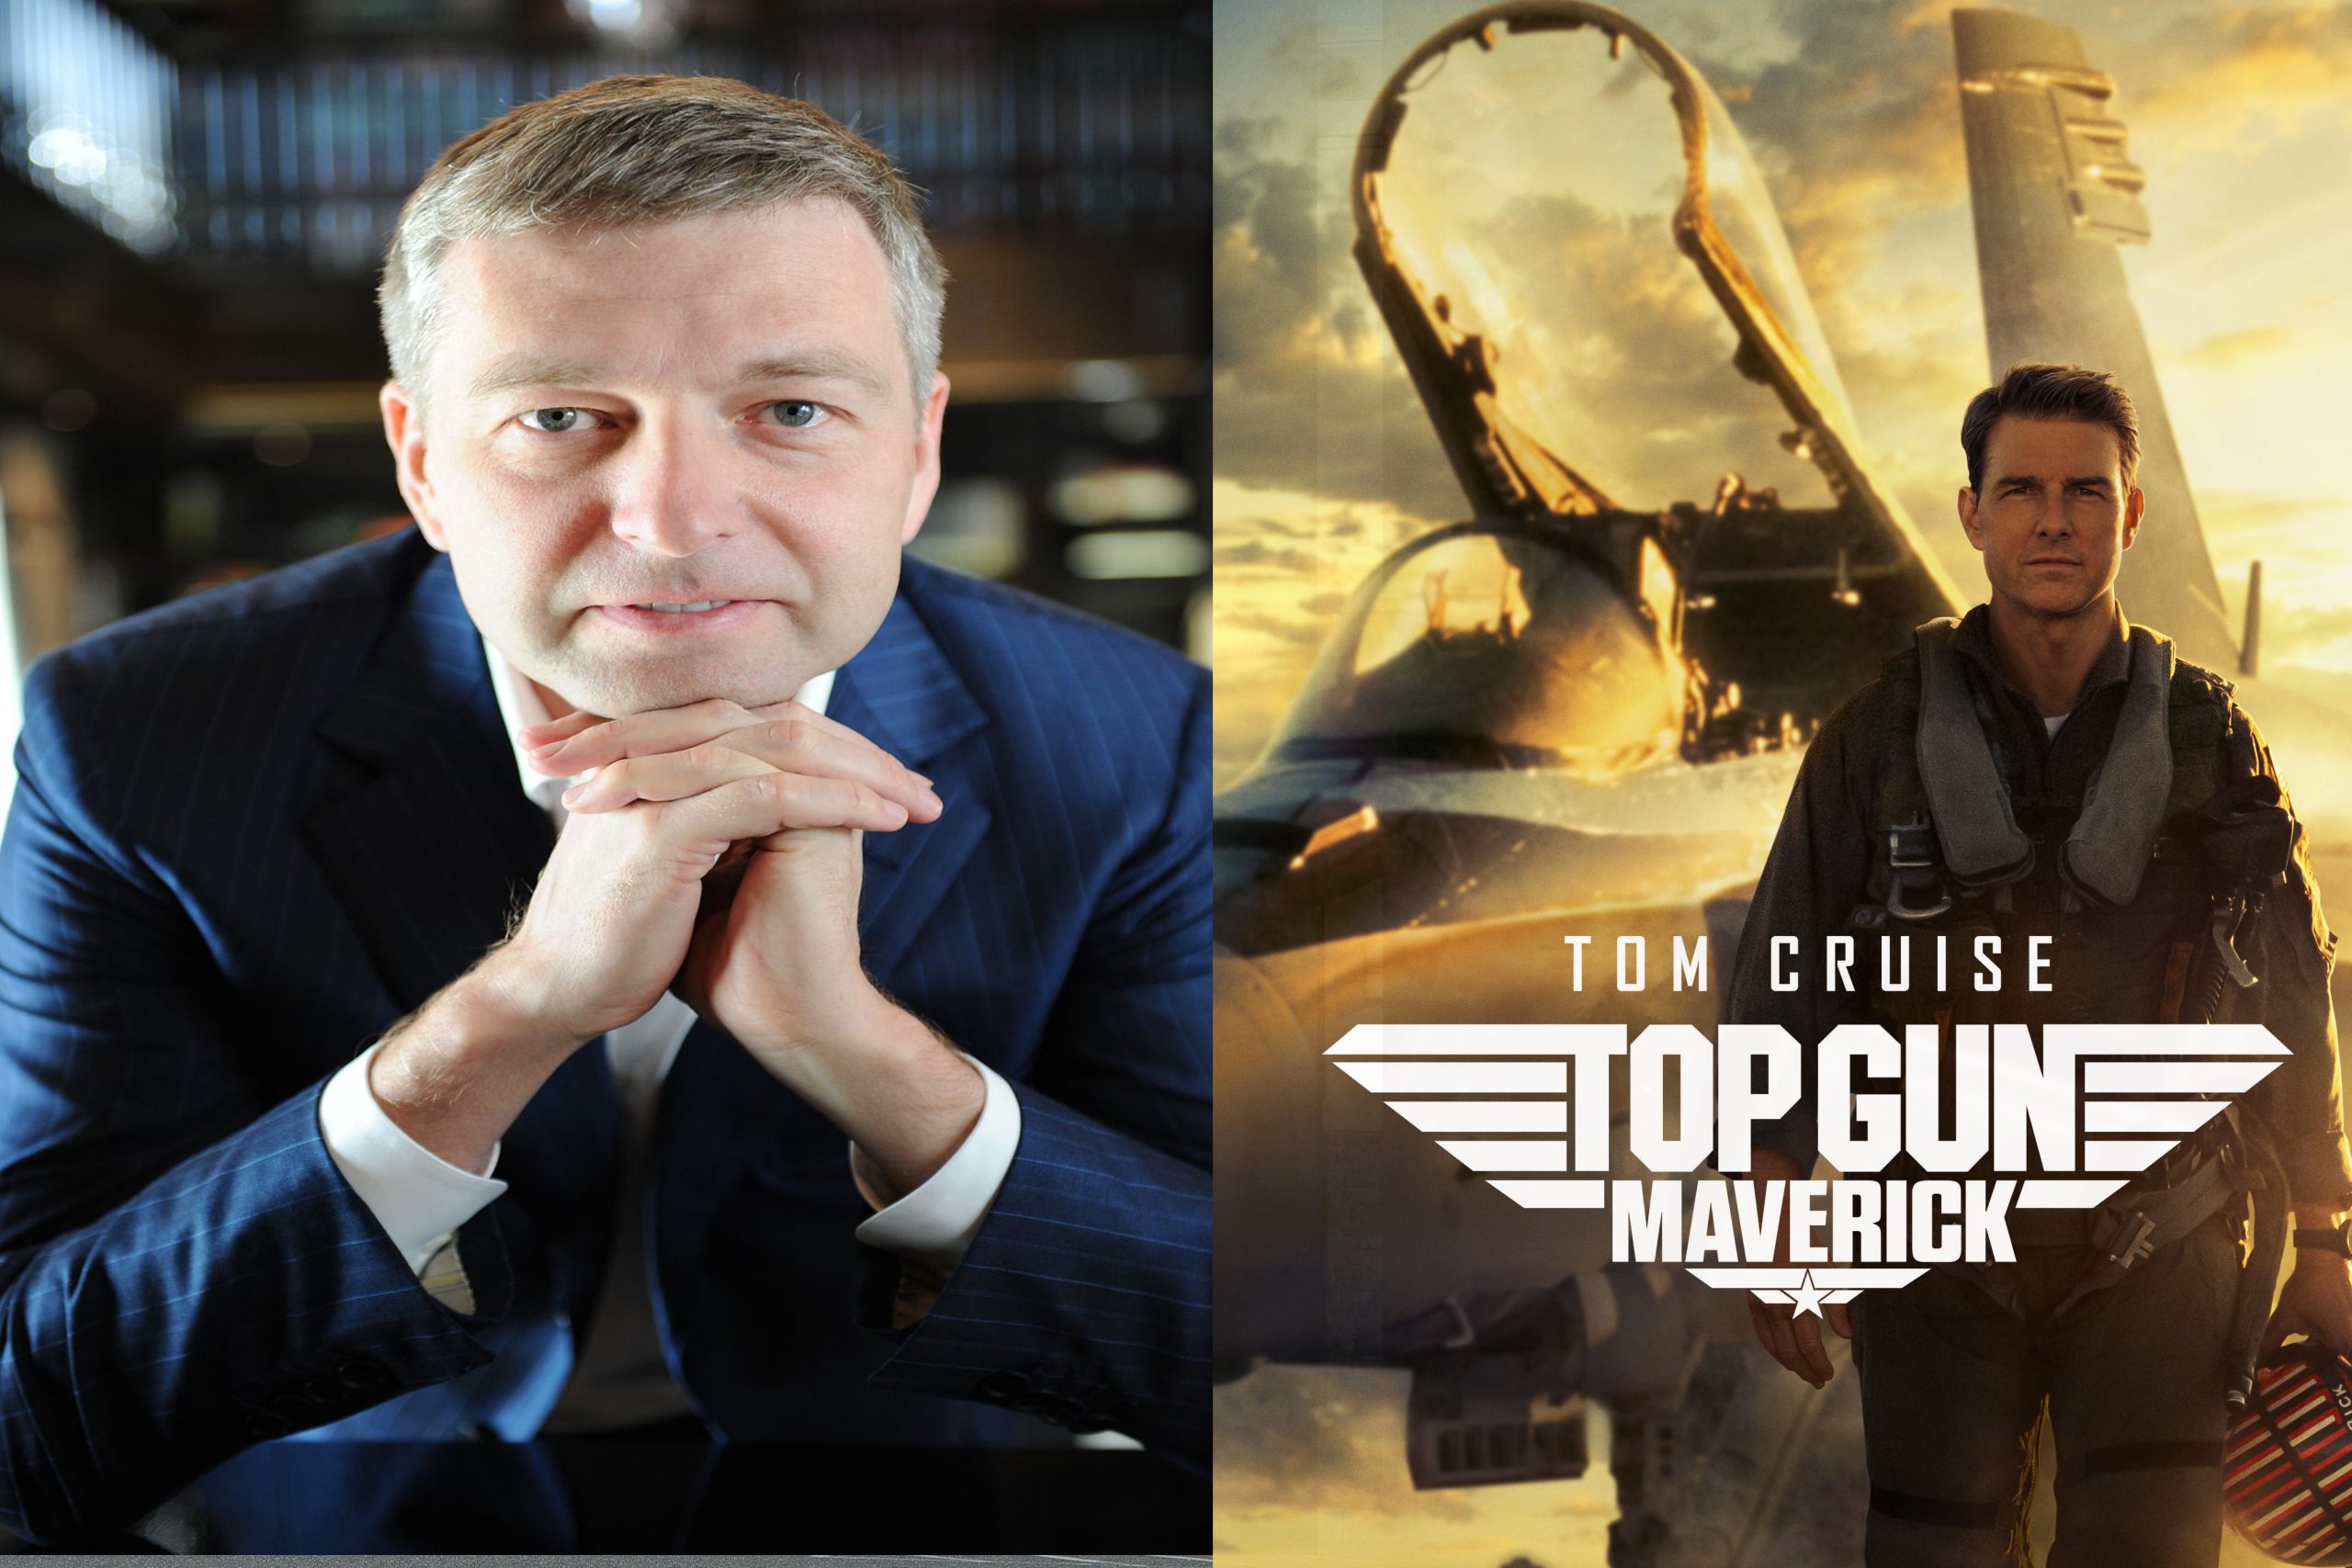 New Lawsuit Alleges Russian Billionaire Dmitry Rybolovlev Funded Hollywood’s Biggest Hits, Withdrew When Russia Invaded Ukraine